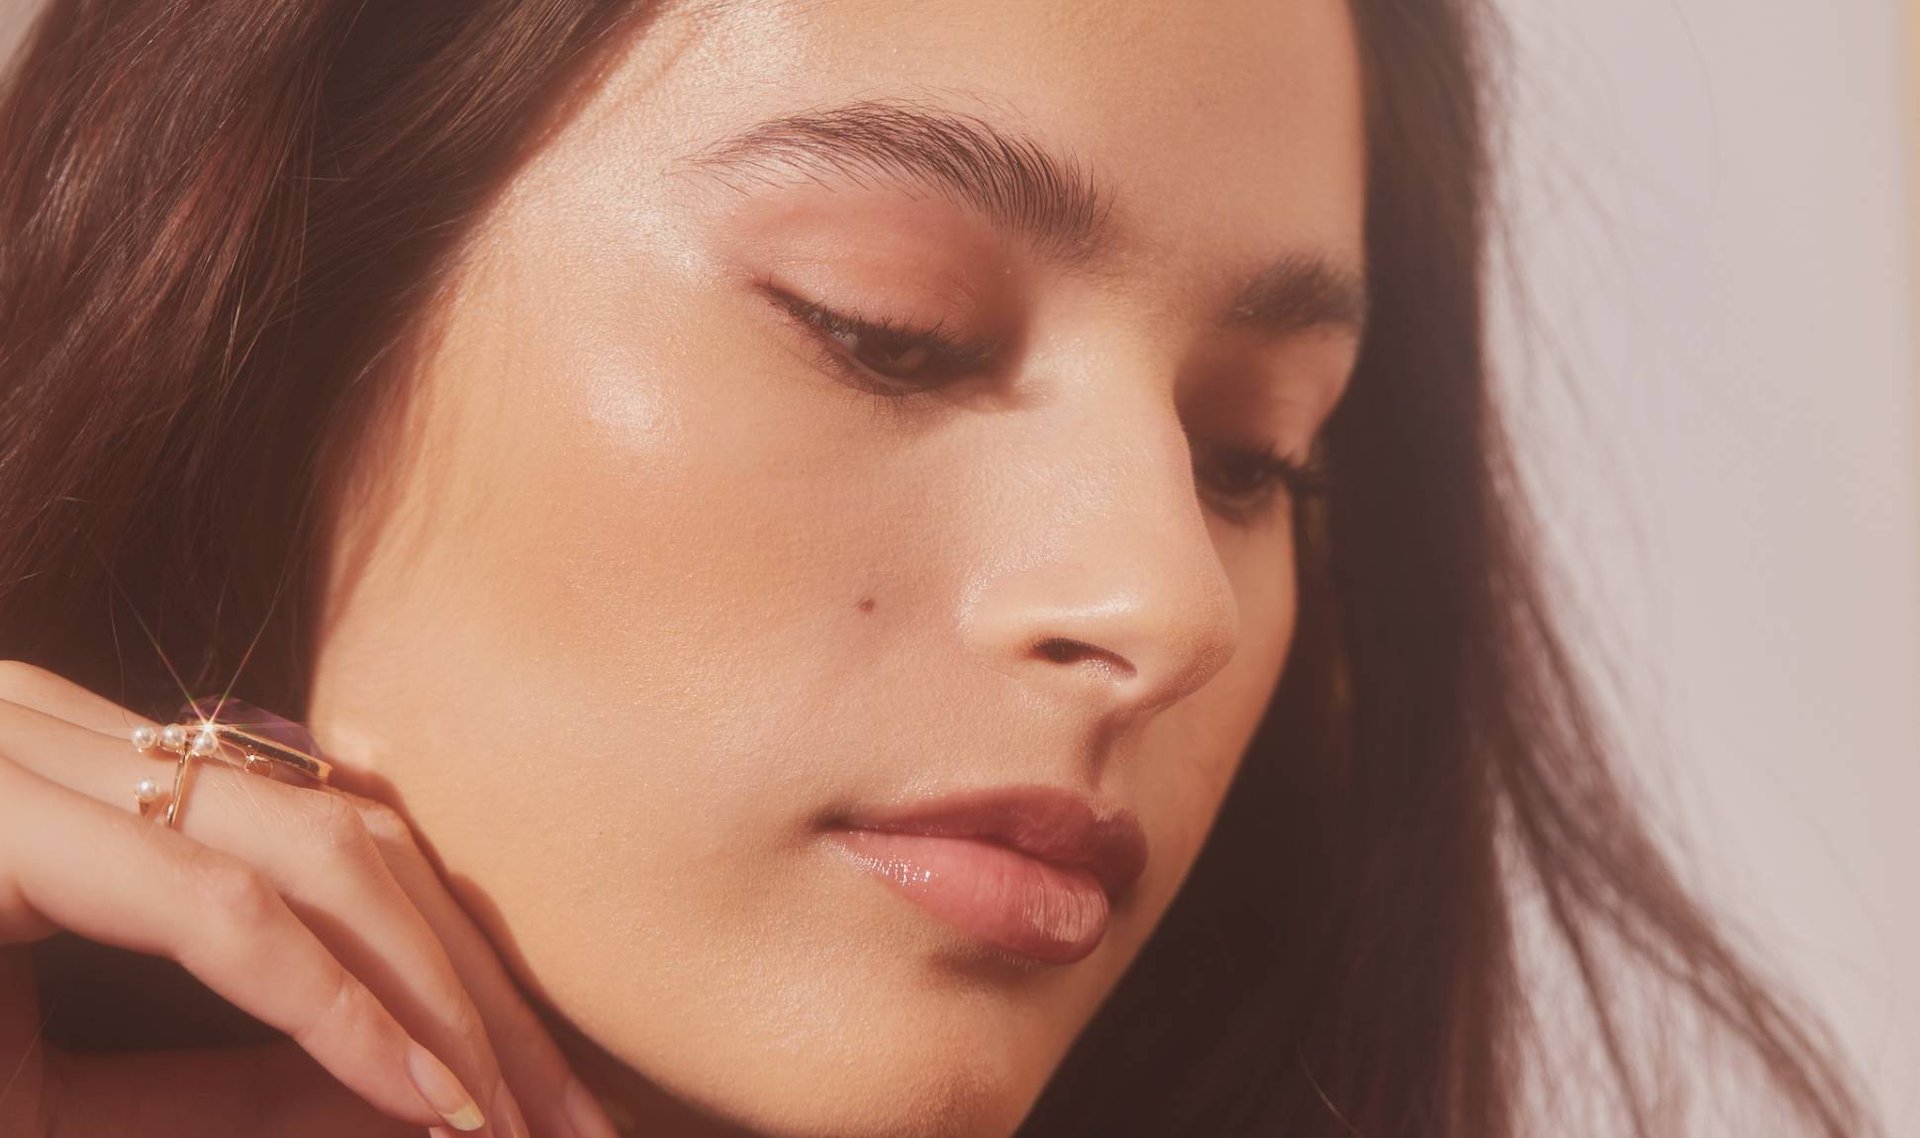 How to Address Dry Skin and Large Pores